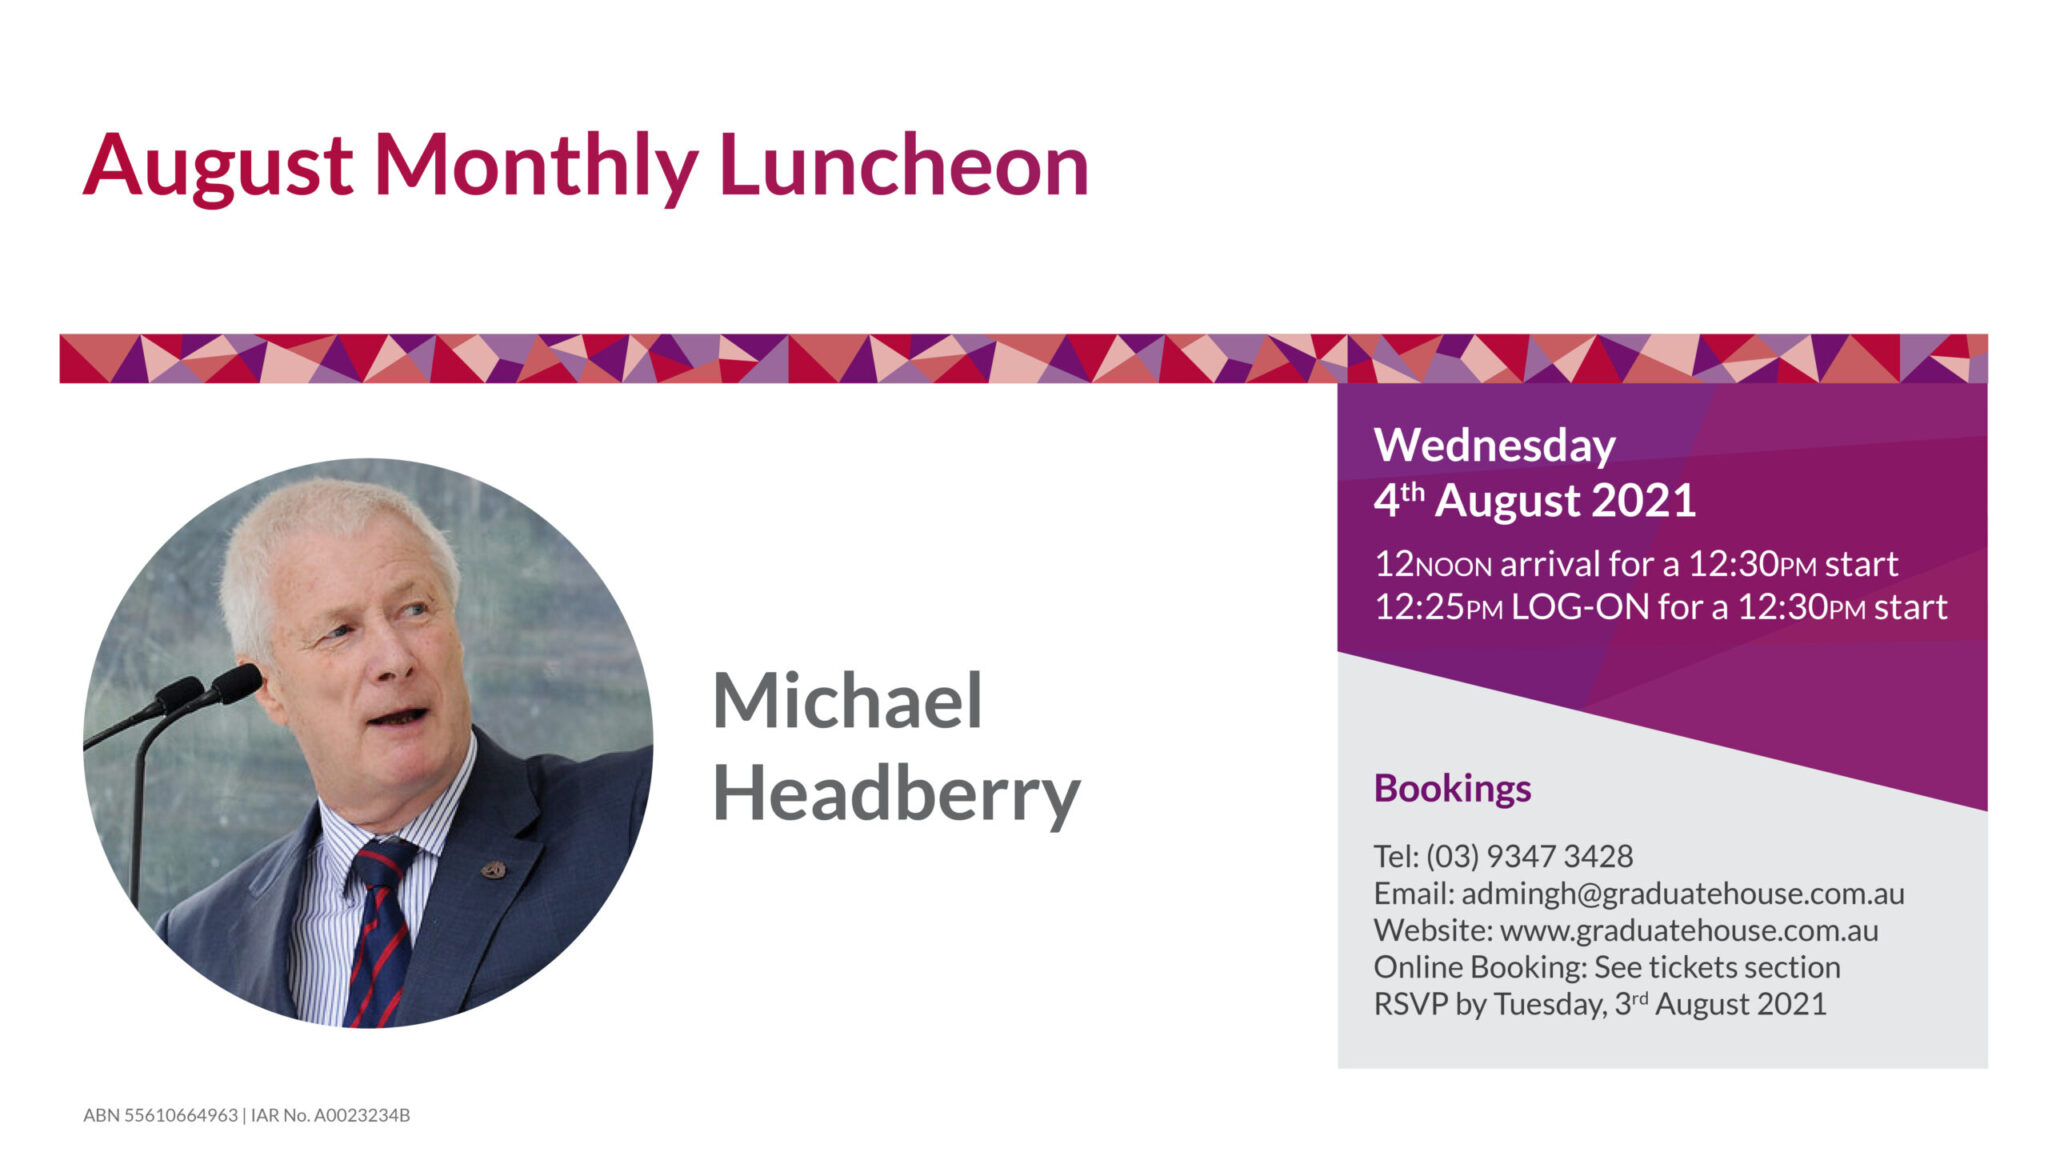 Monthly Luncheon August 2021